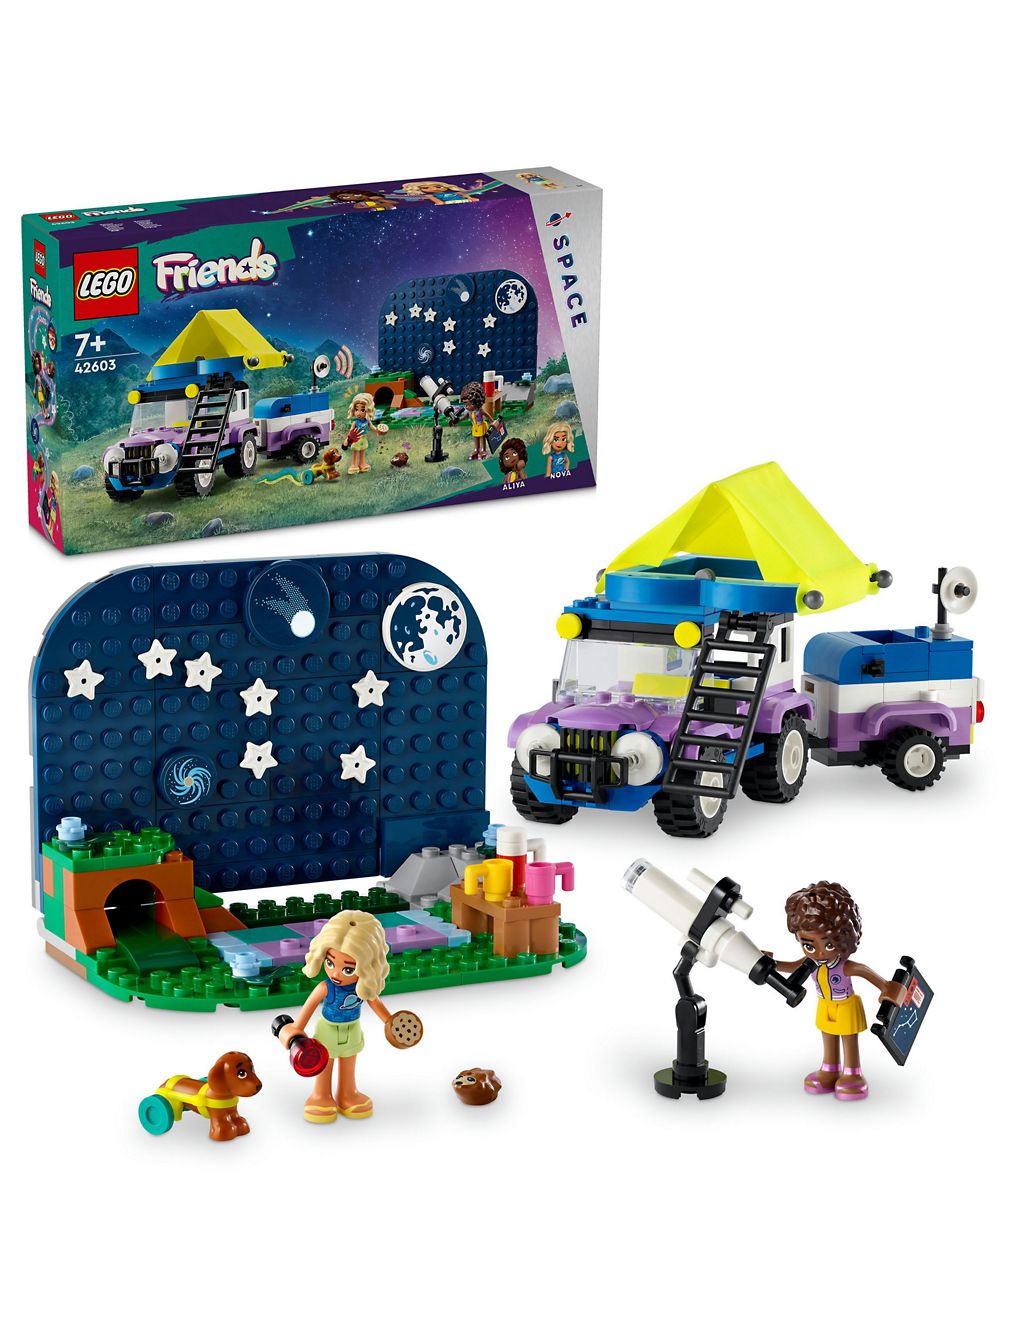 LEGO® Friends Stargazing Camping Vehicle Toy 42603 (7+ Yrs) 3 of 5